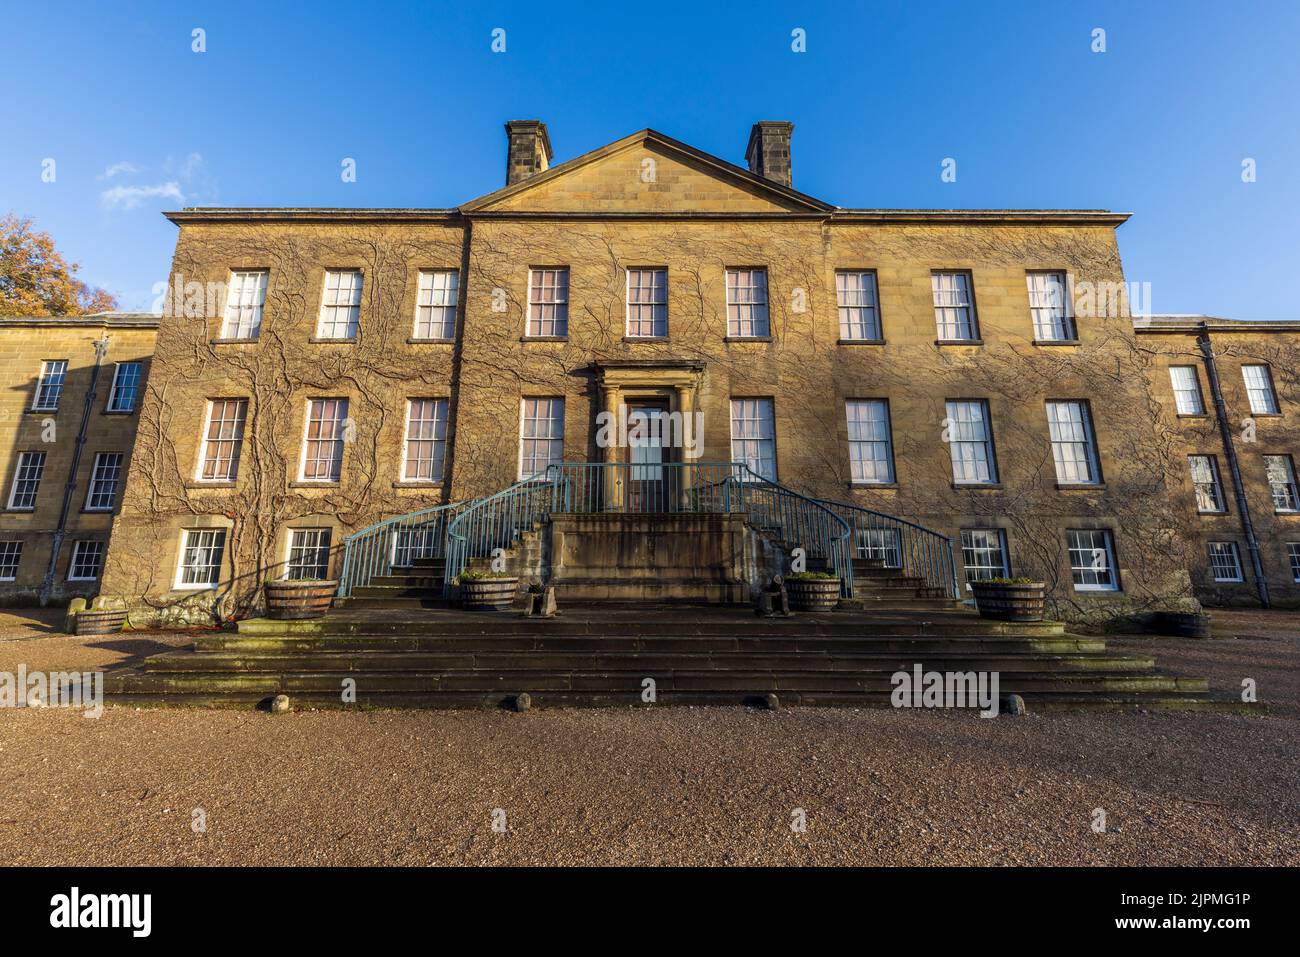 Erddig Country House in the winter sun, Wrexham, North Wales Stock Photo